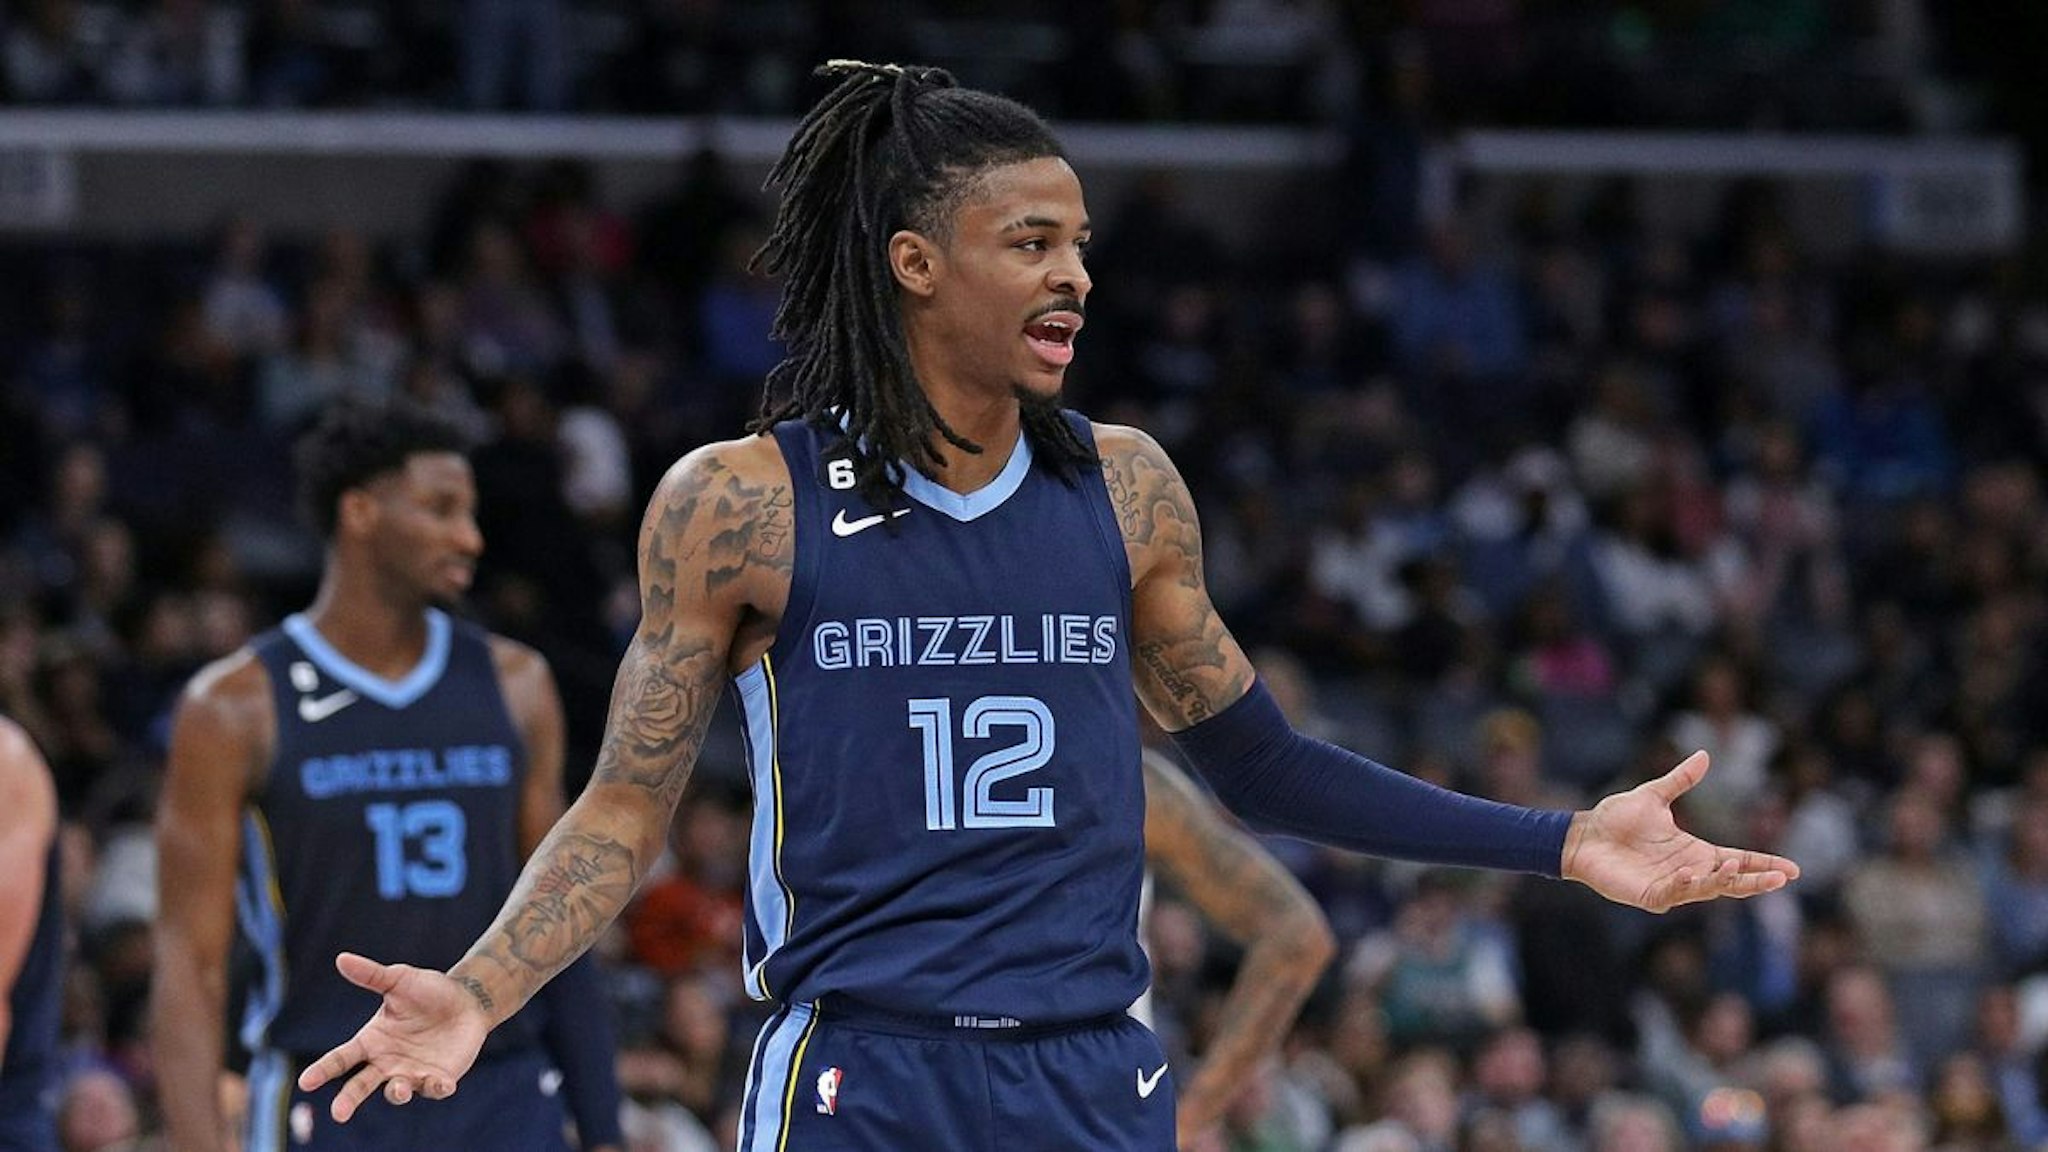 Ja Morant #12 of the Memphis Grizzlies reacts during the game against the Sacramento Kings at FedExForum on January 01, 2023 in Memphis, Tennessee.